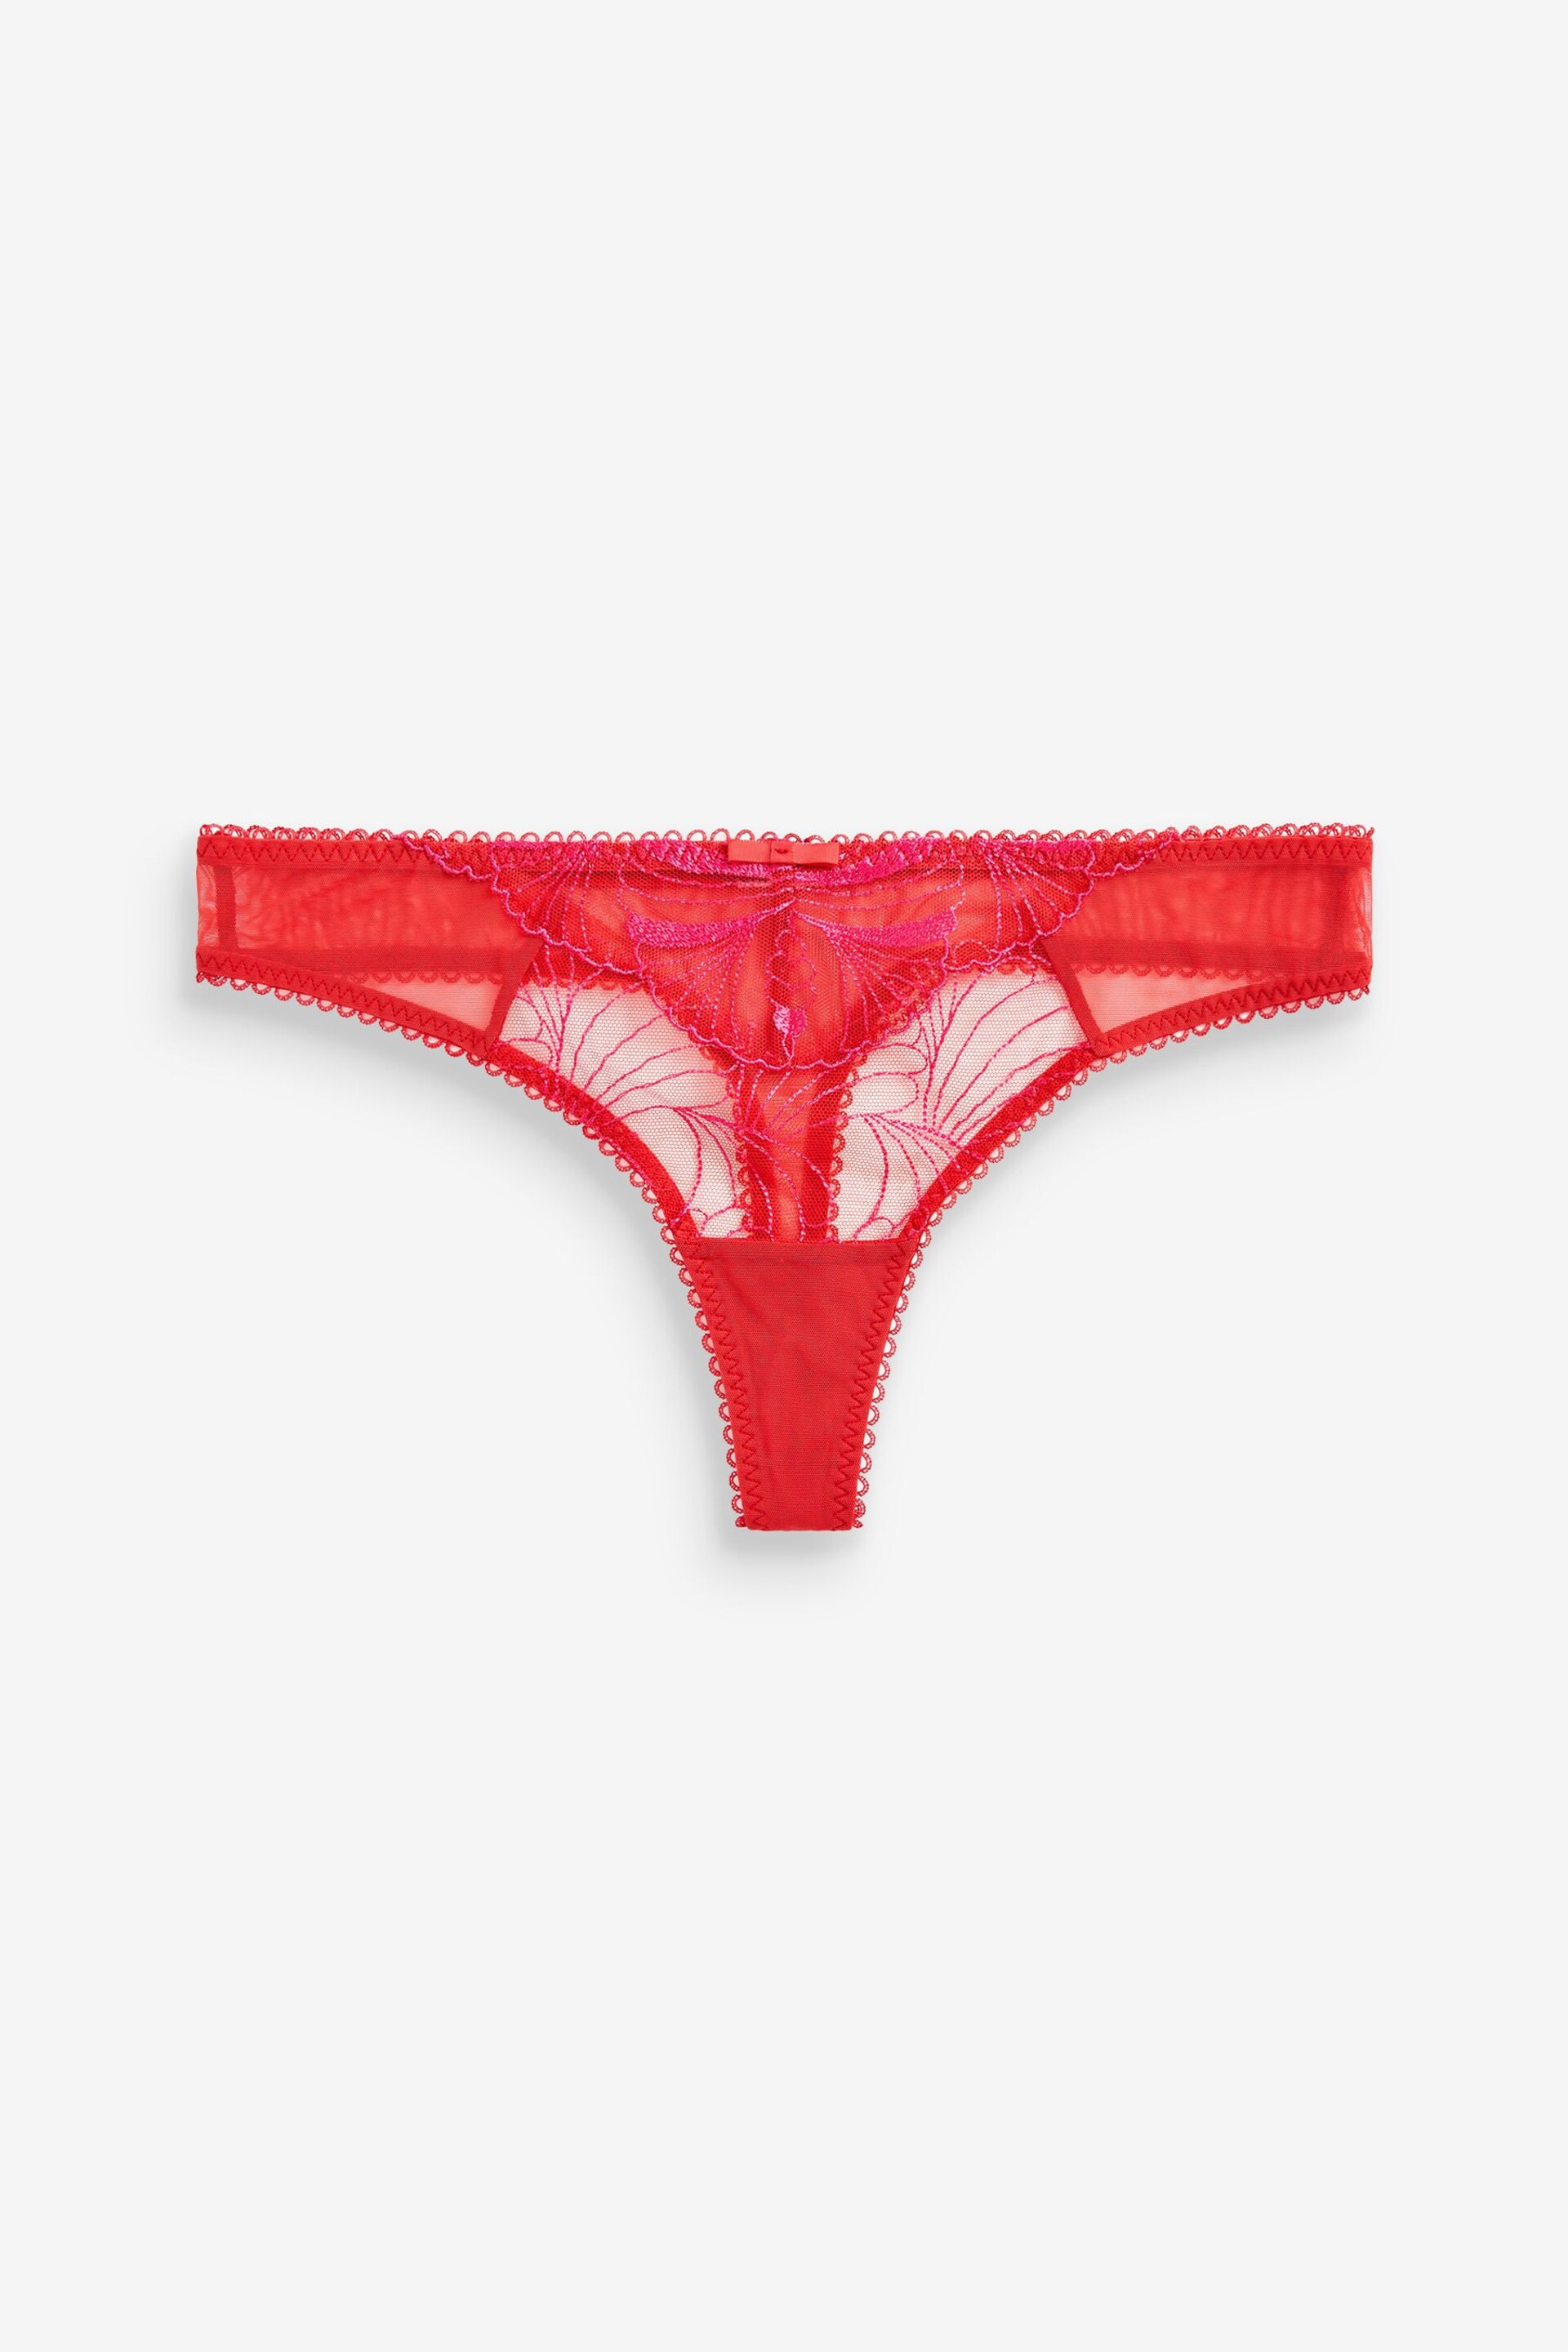 Red/Black Thong Embroidered Knickers 2 Pack - Image 2 of 7